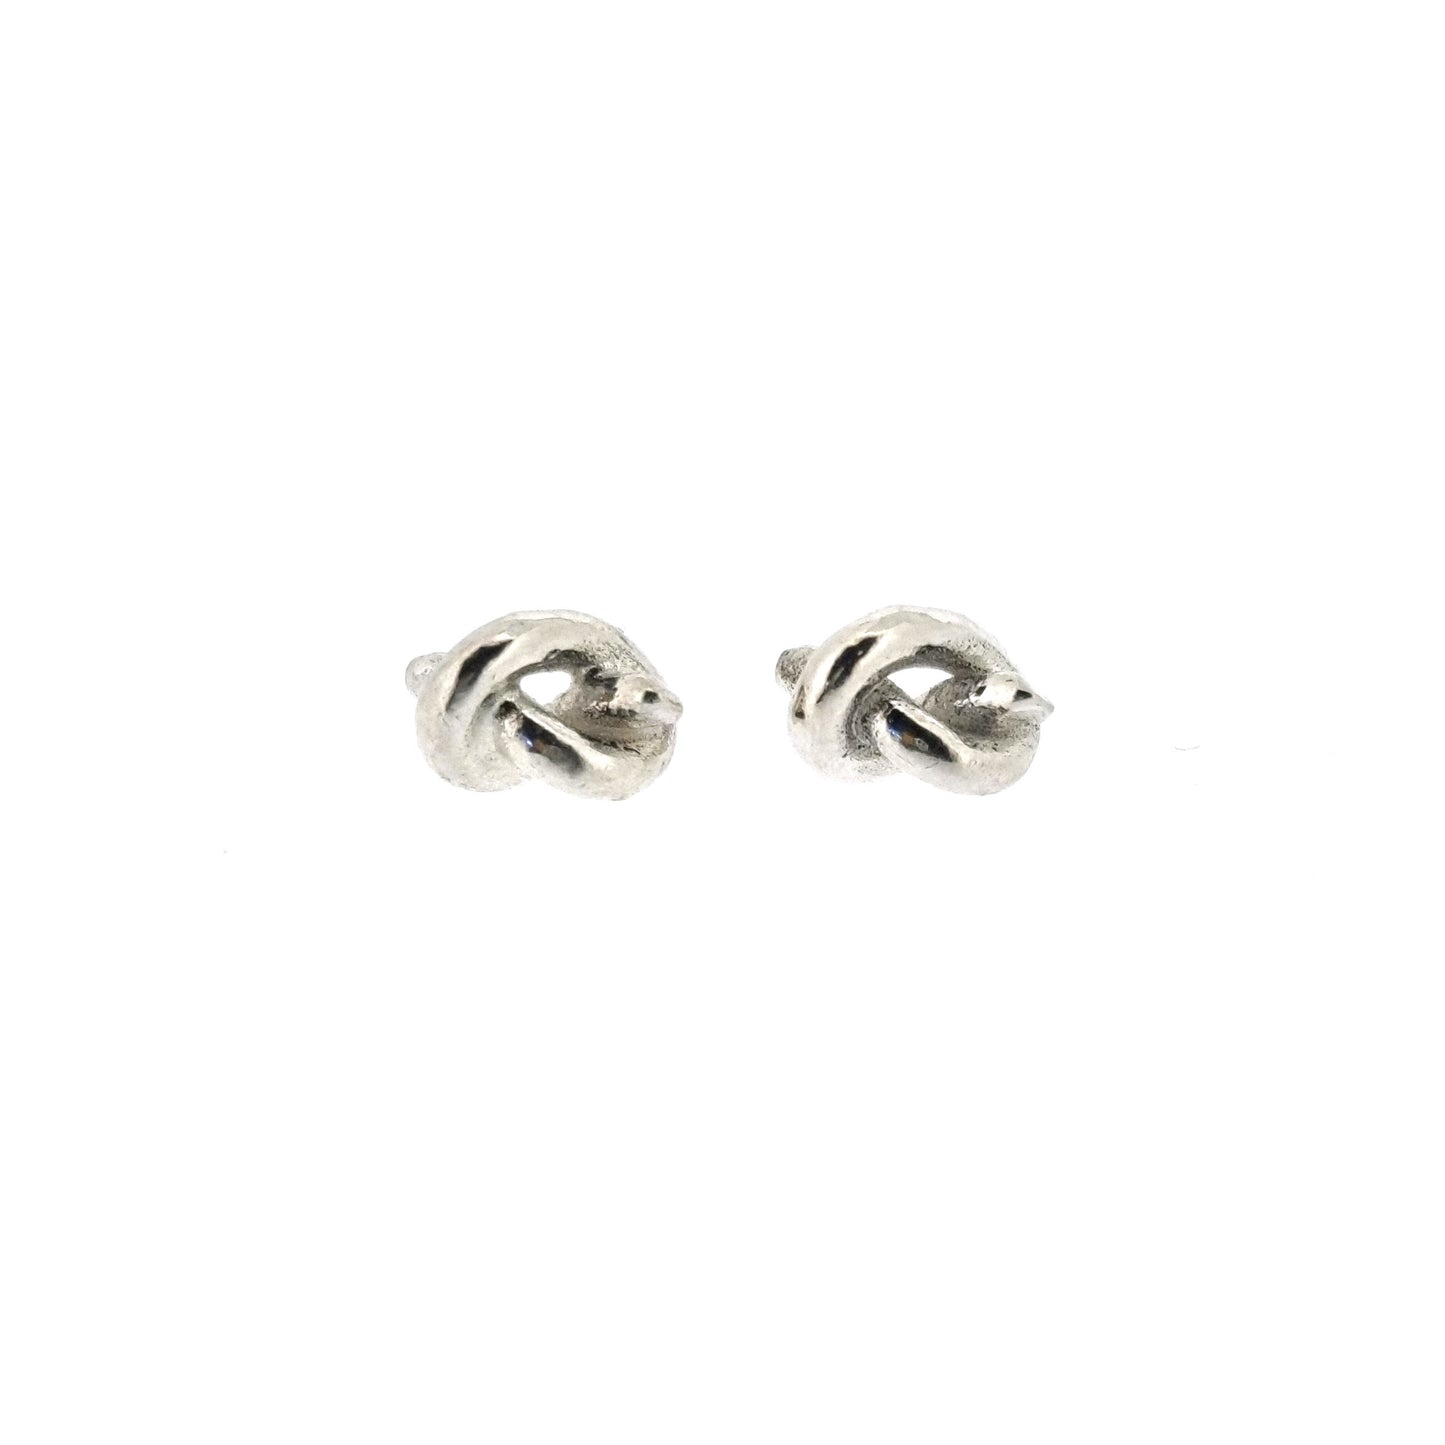 Silver stud earrings in the shape of a knot in a piece of string.